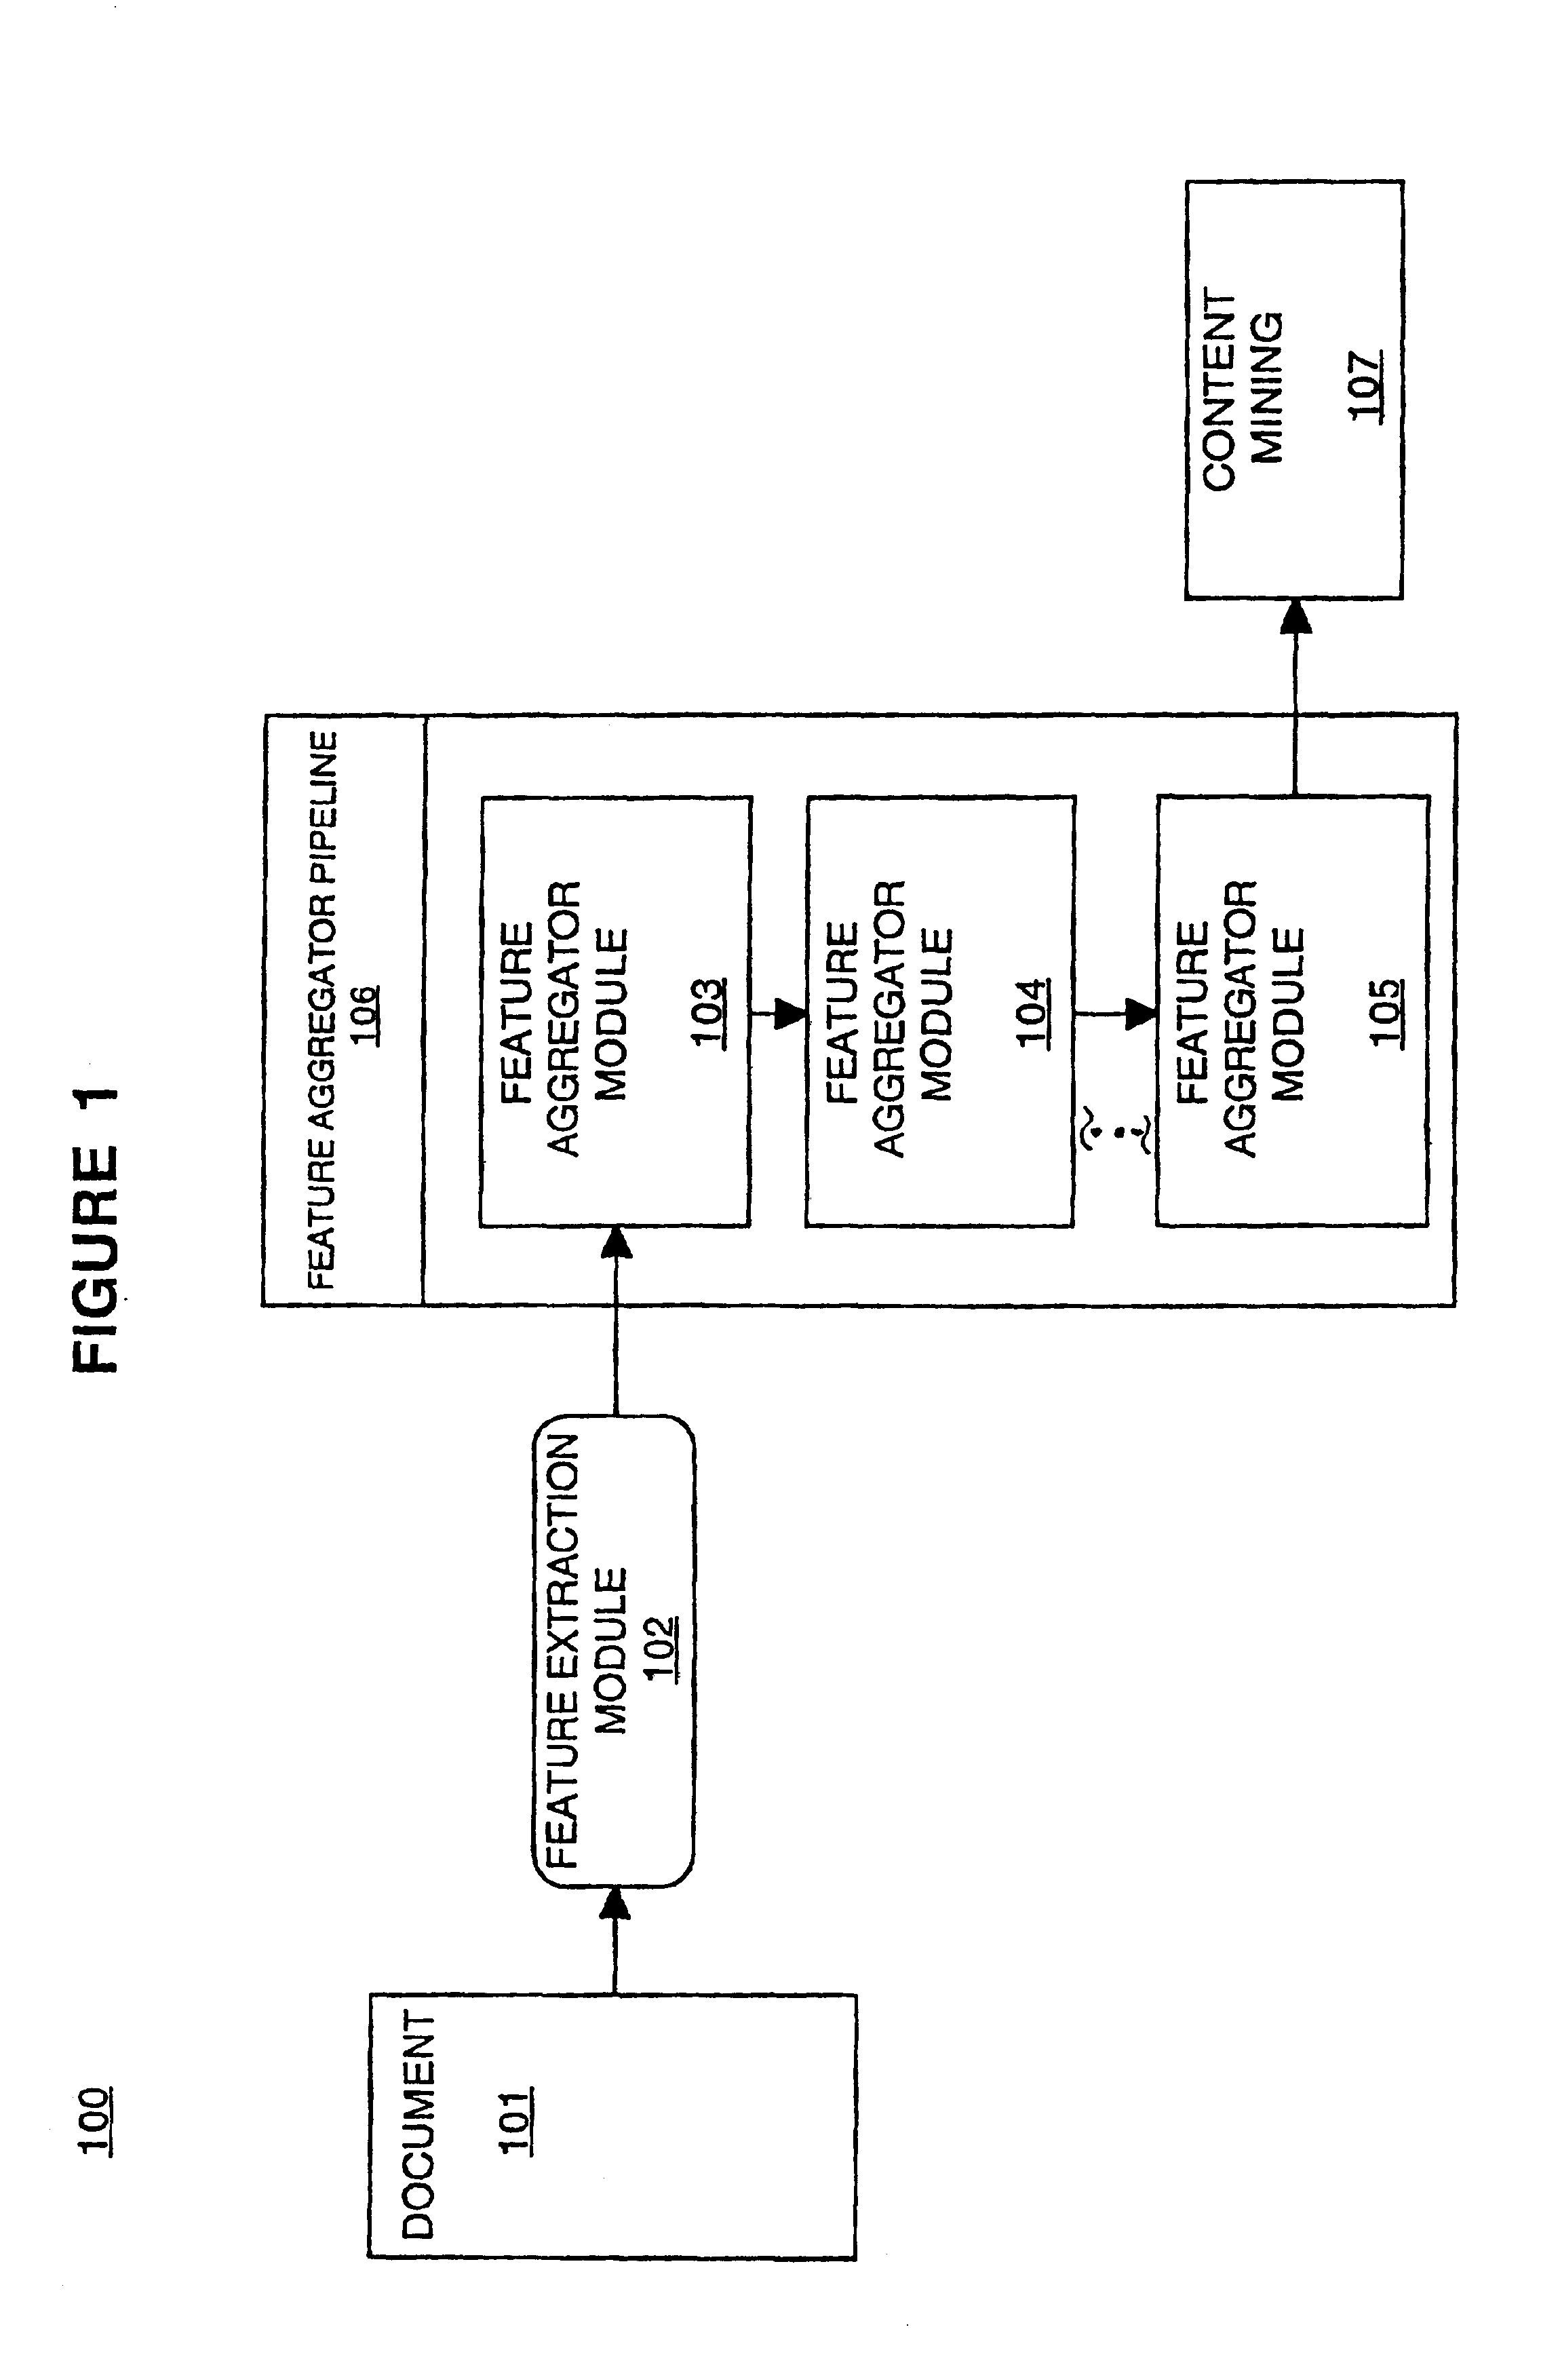 Method for content mining of semi-structured documents